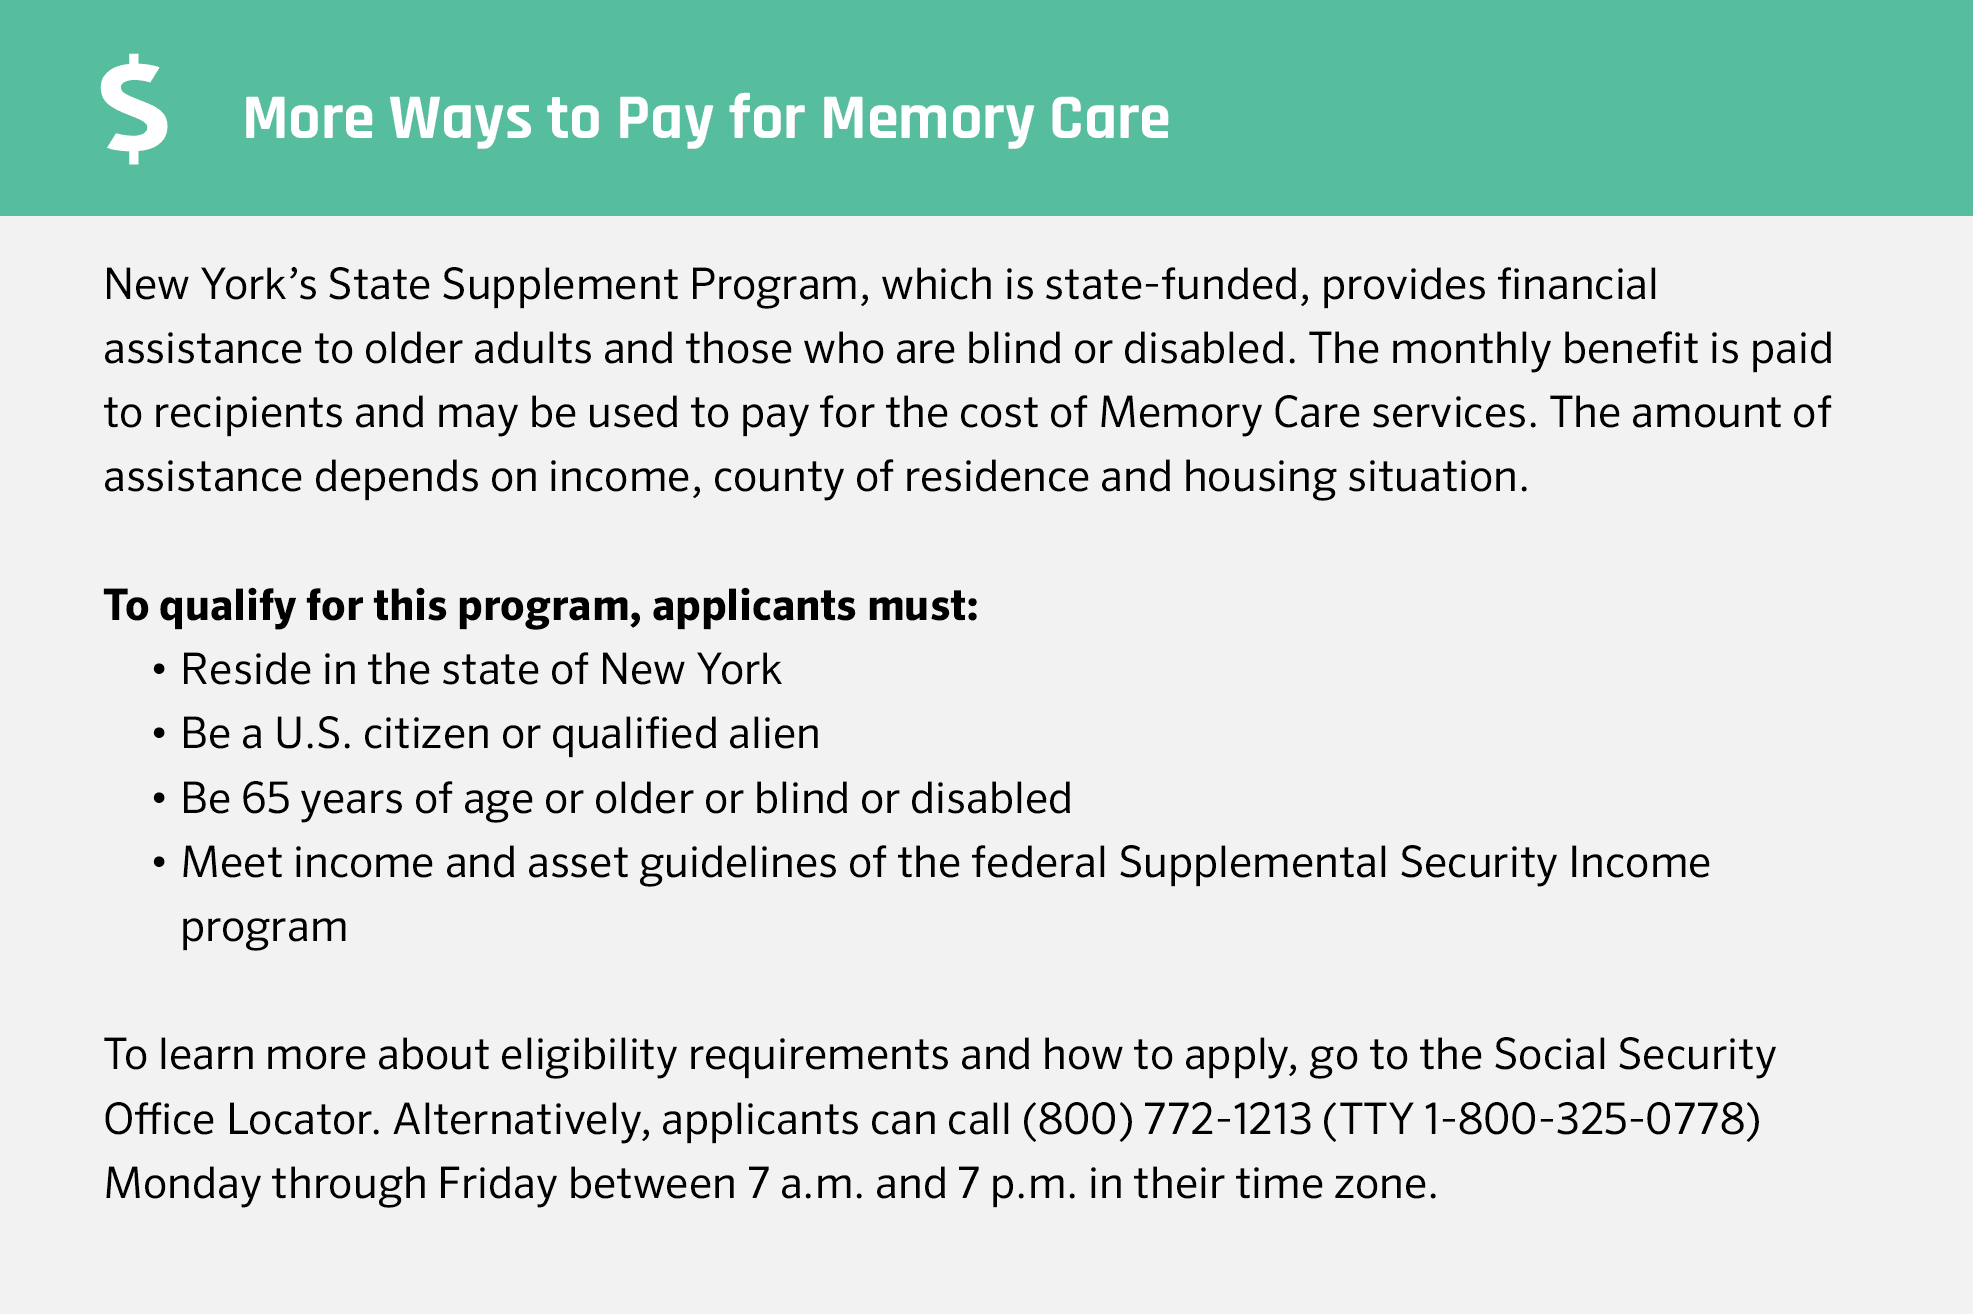 Financial Assistance for Memory Care in ew York